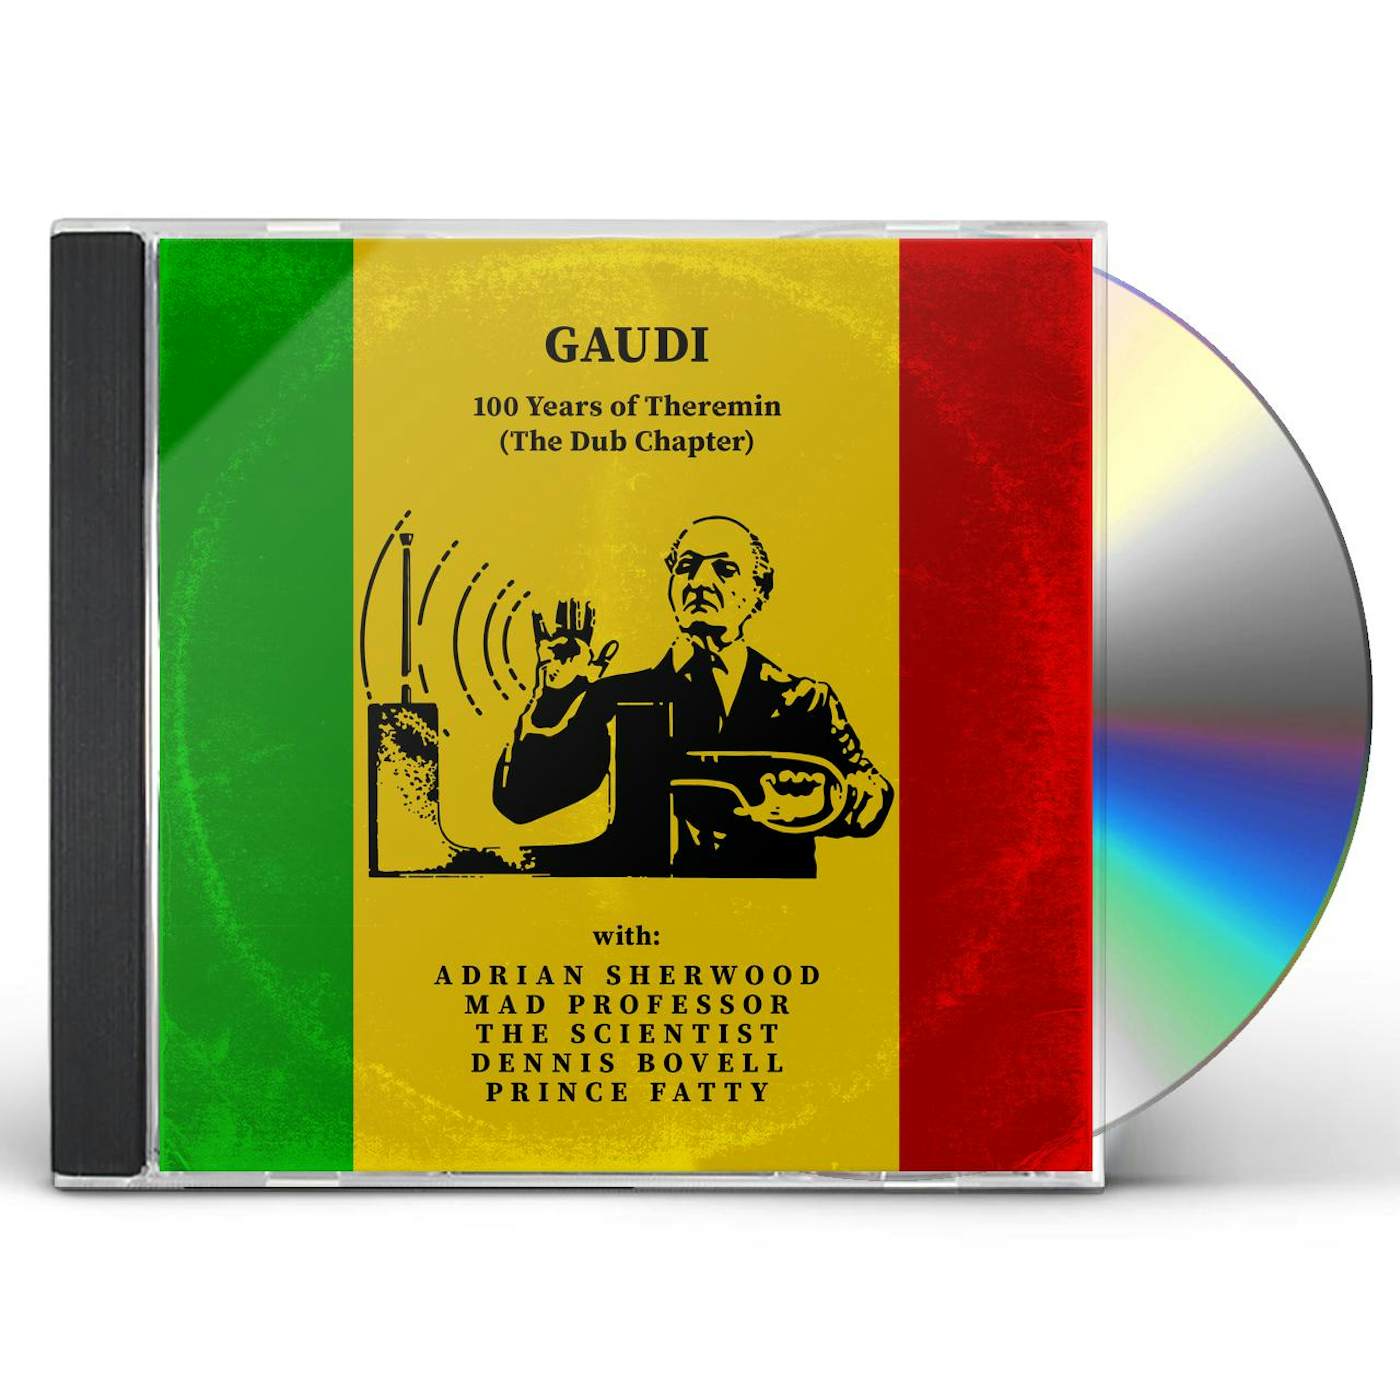 Gaudi 100 YEARS OF THEREMIN (THE DUB CHAPTER) CD